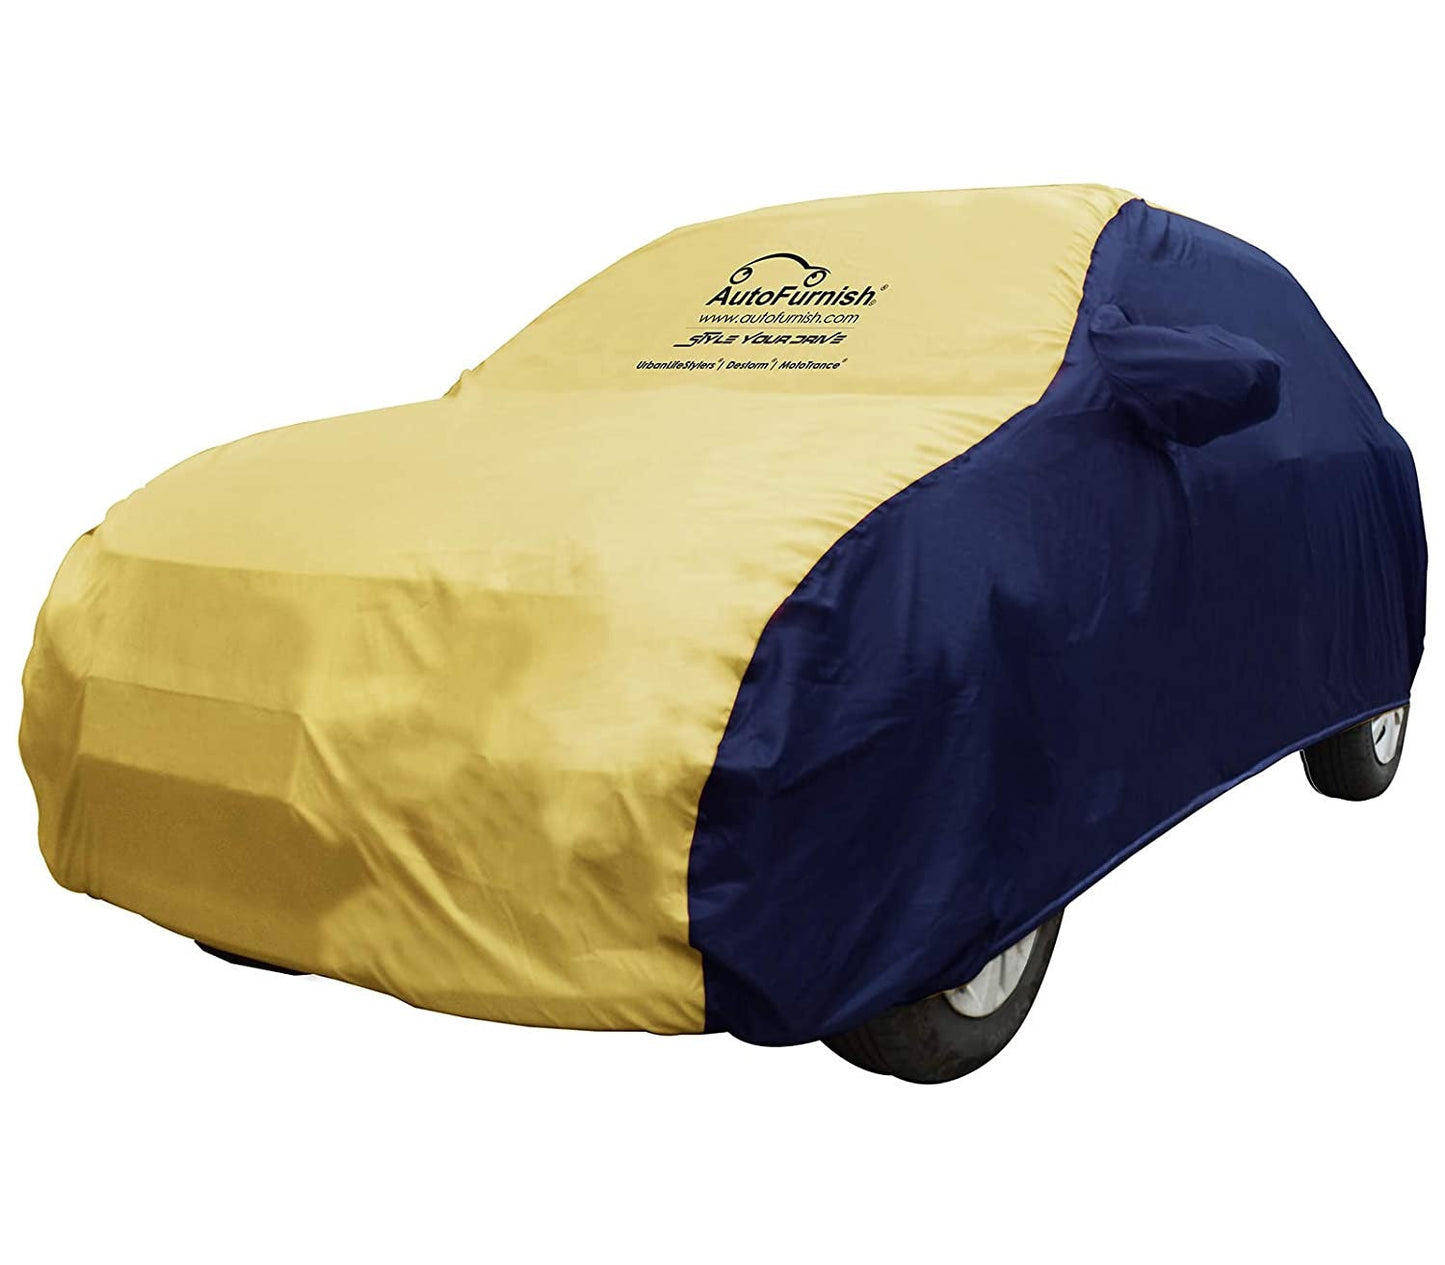 Audi Q8 (2020) Car Body Cover, Triple Stitched, Heat & Water Resistant with Side Mirror Pockets (SPORTY Series)